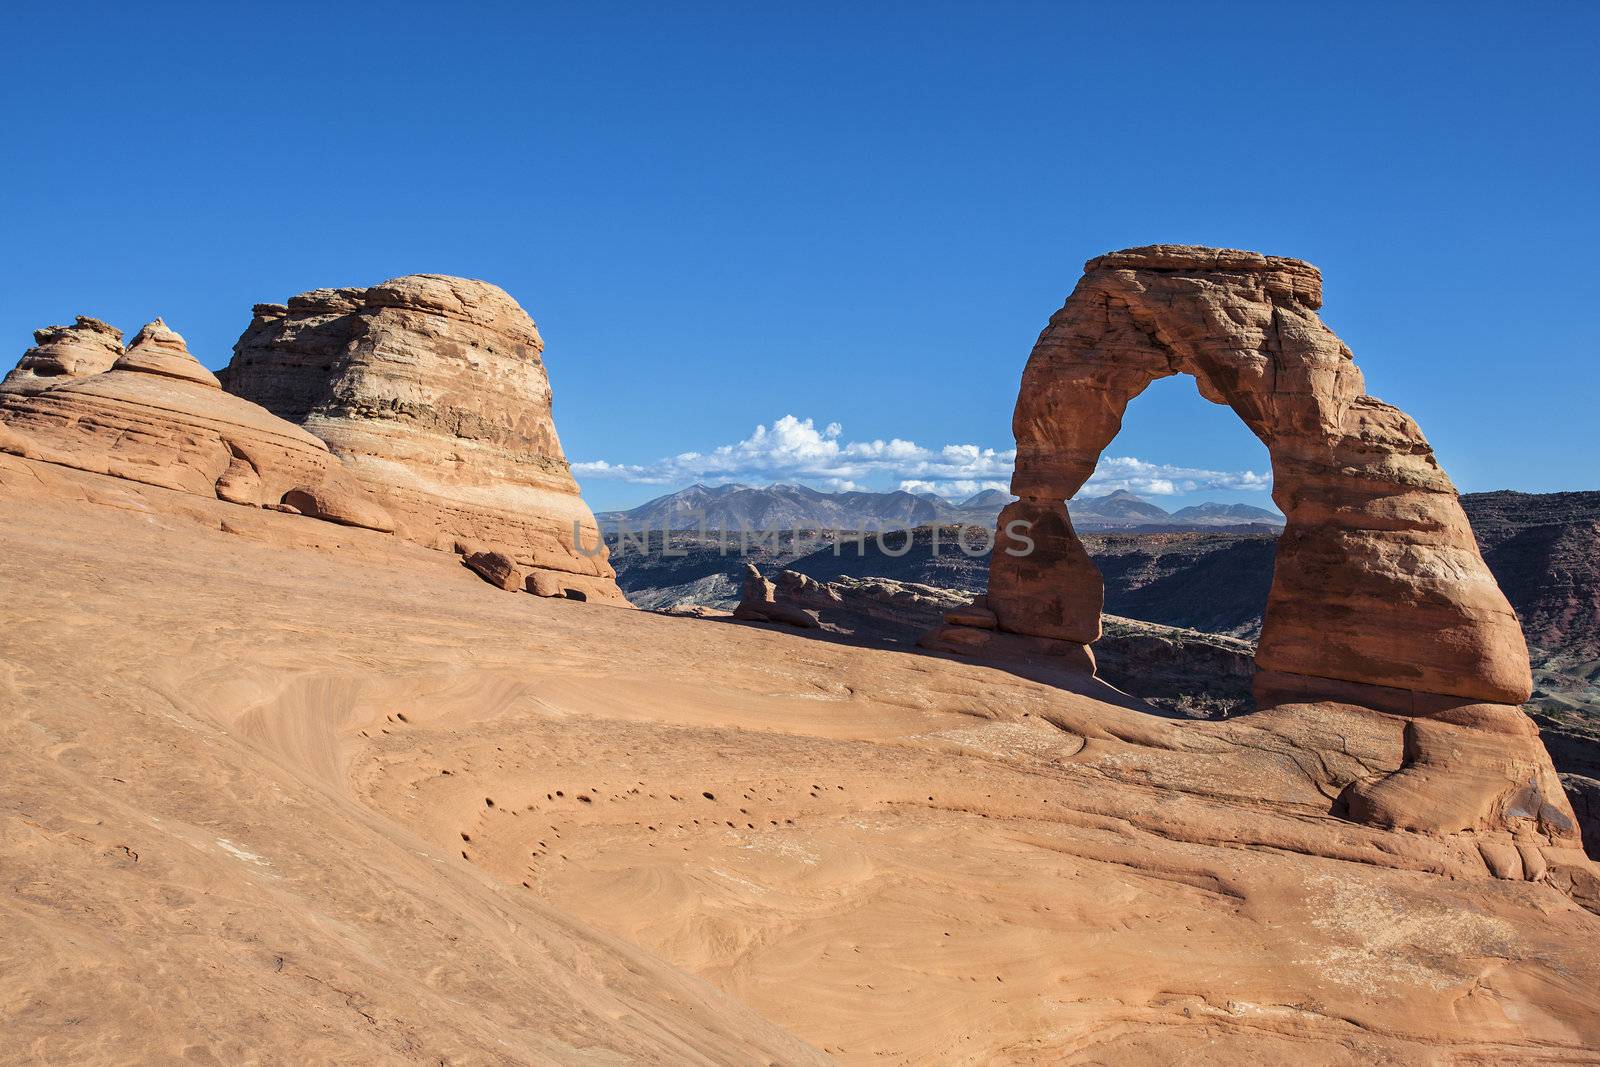 View of the famous Delicate Arch by vwalakte